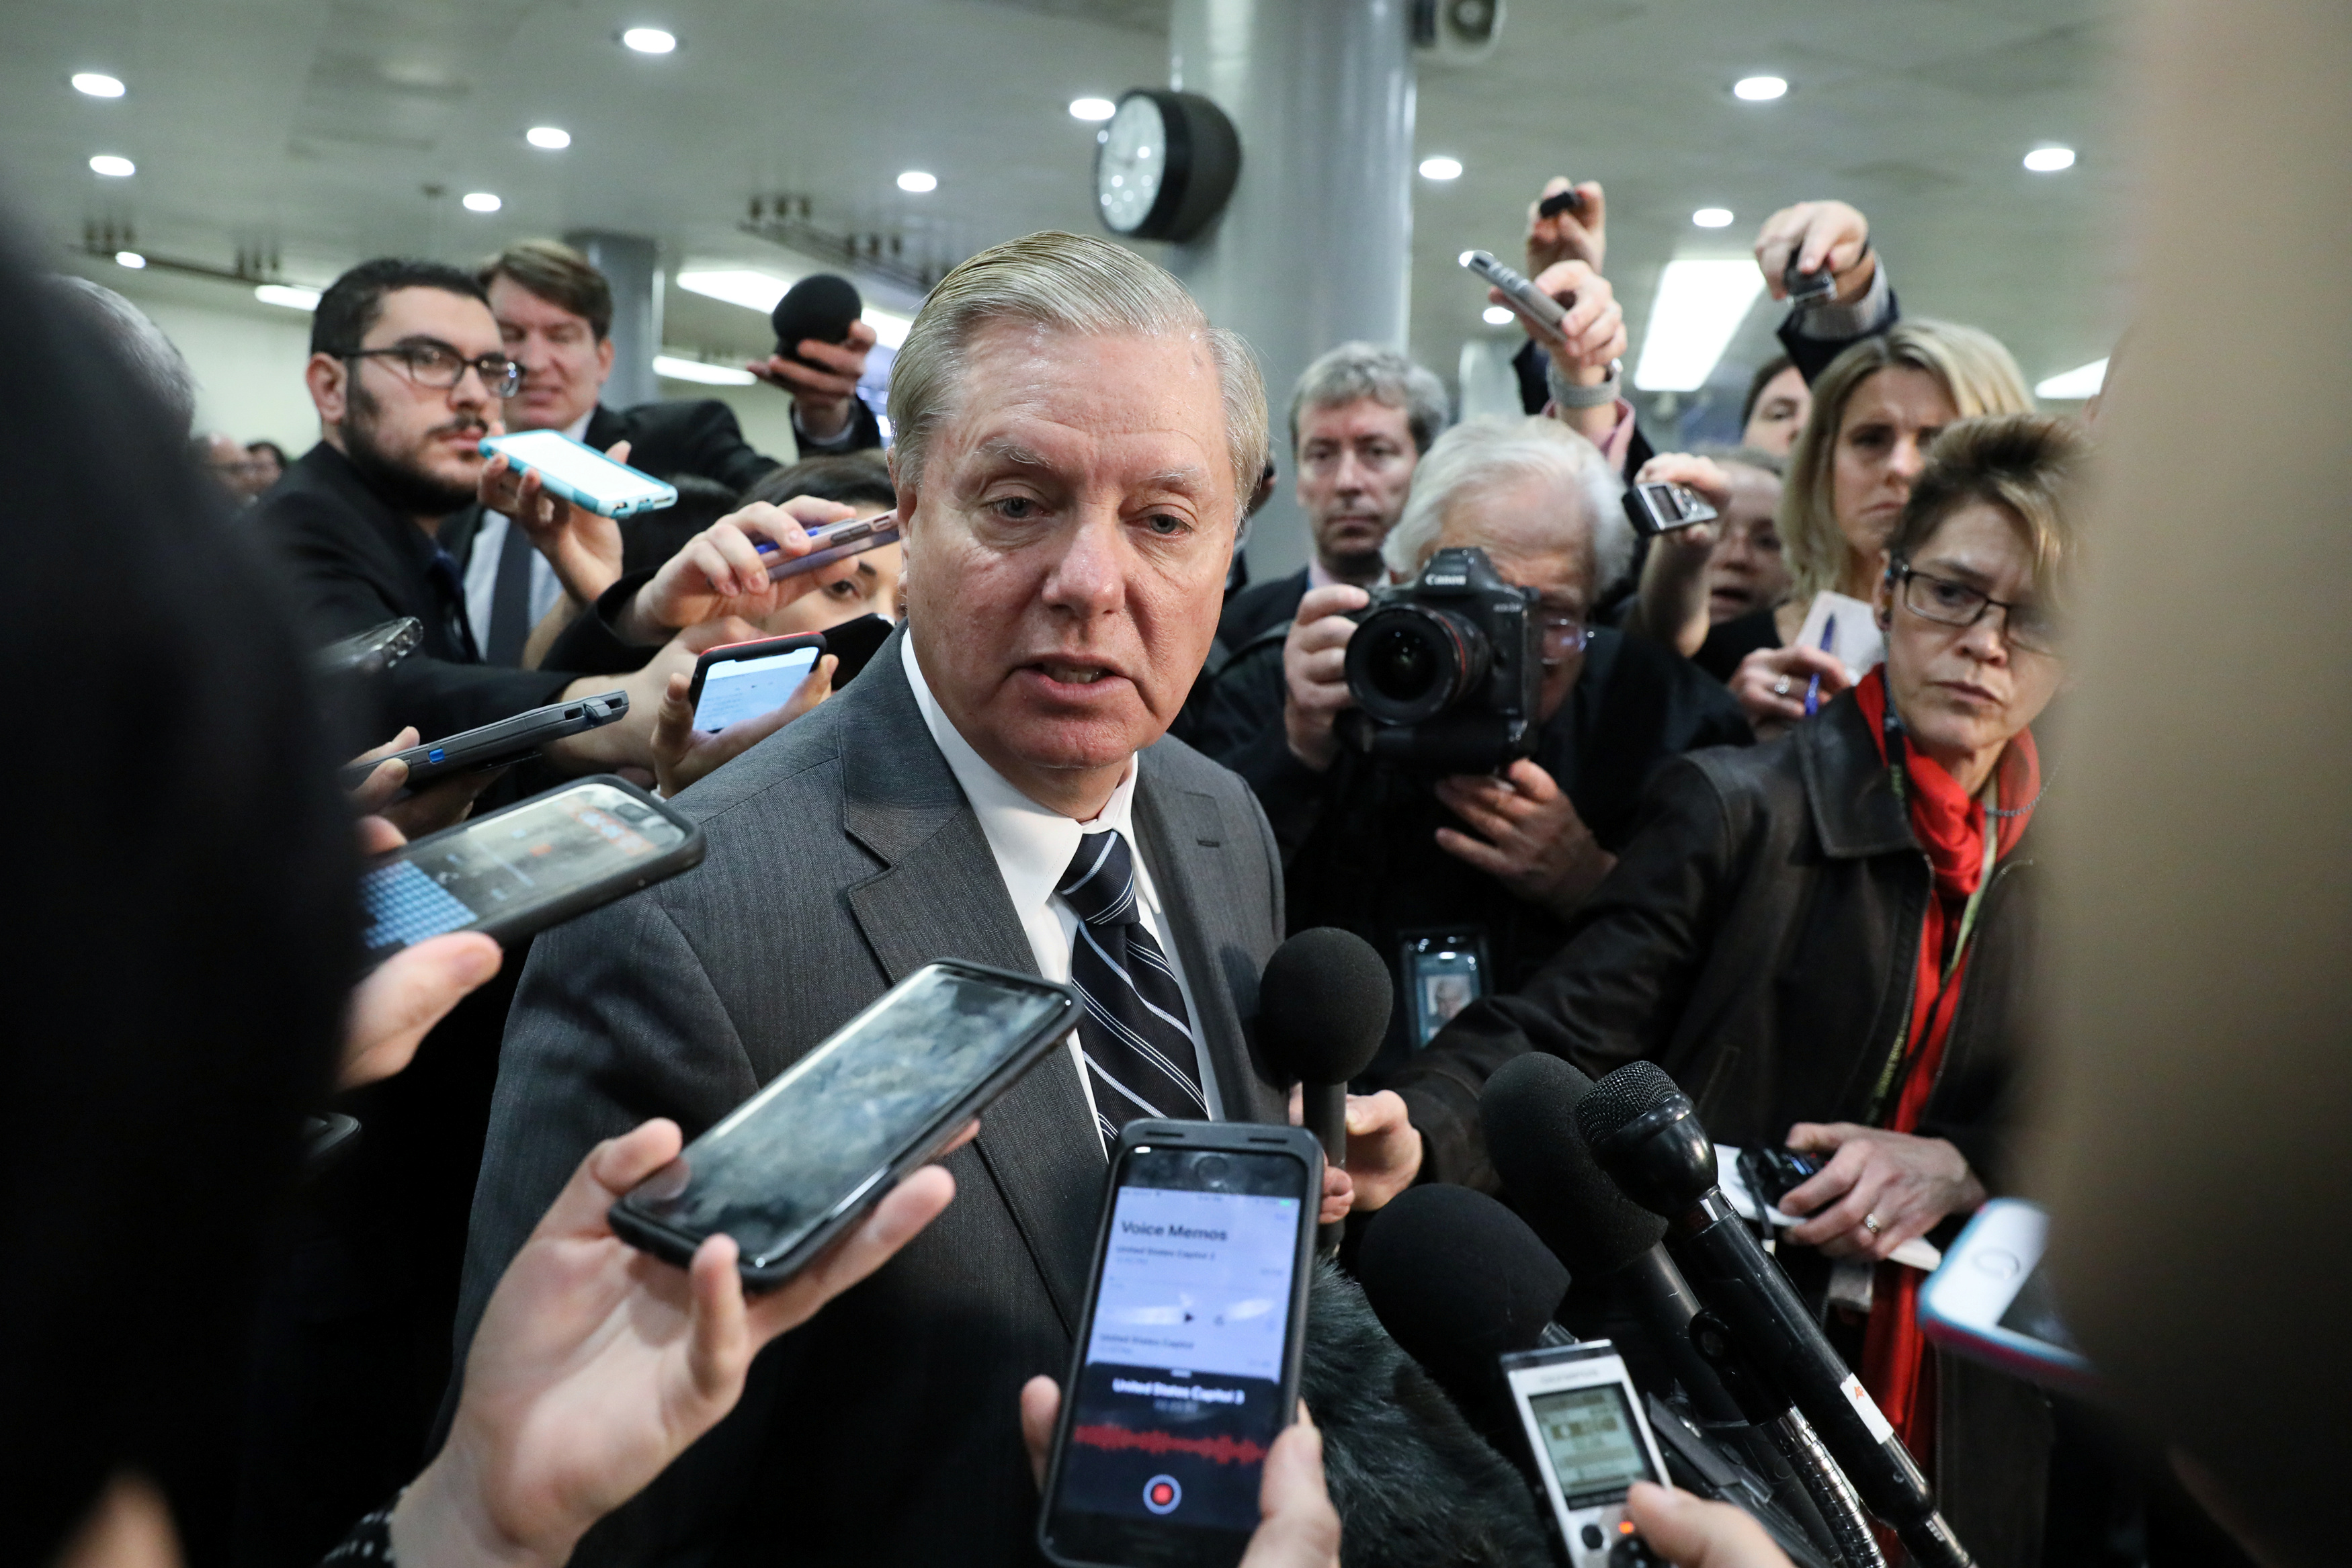 U.S. Senator Graham speaks to reporters after attending a closed-door briefing, on the Khashoggi death, by CIA Director Haspel at the U.S. Capitol in Washington